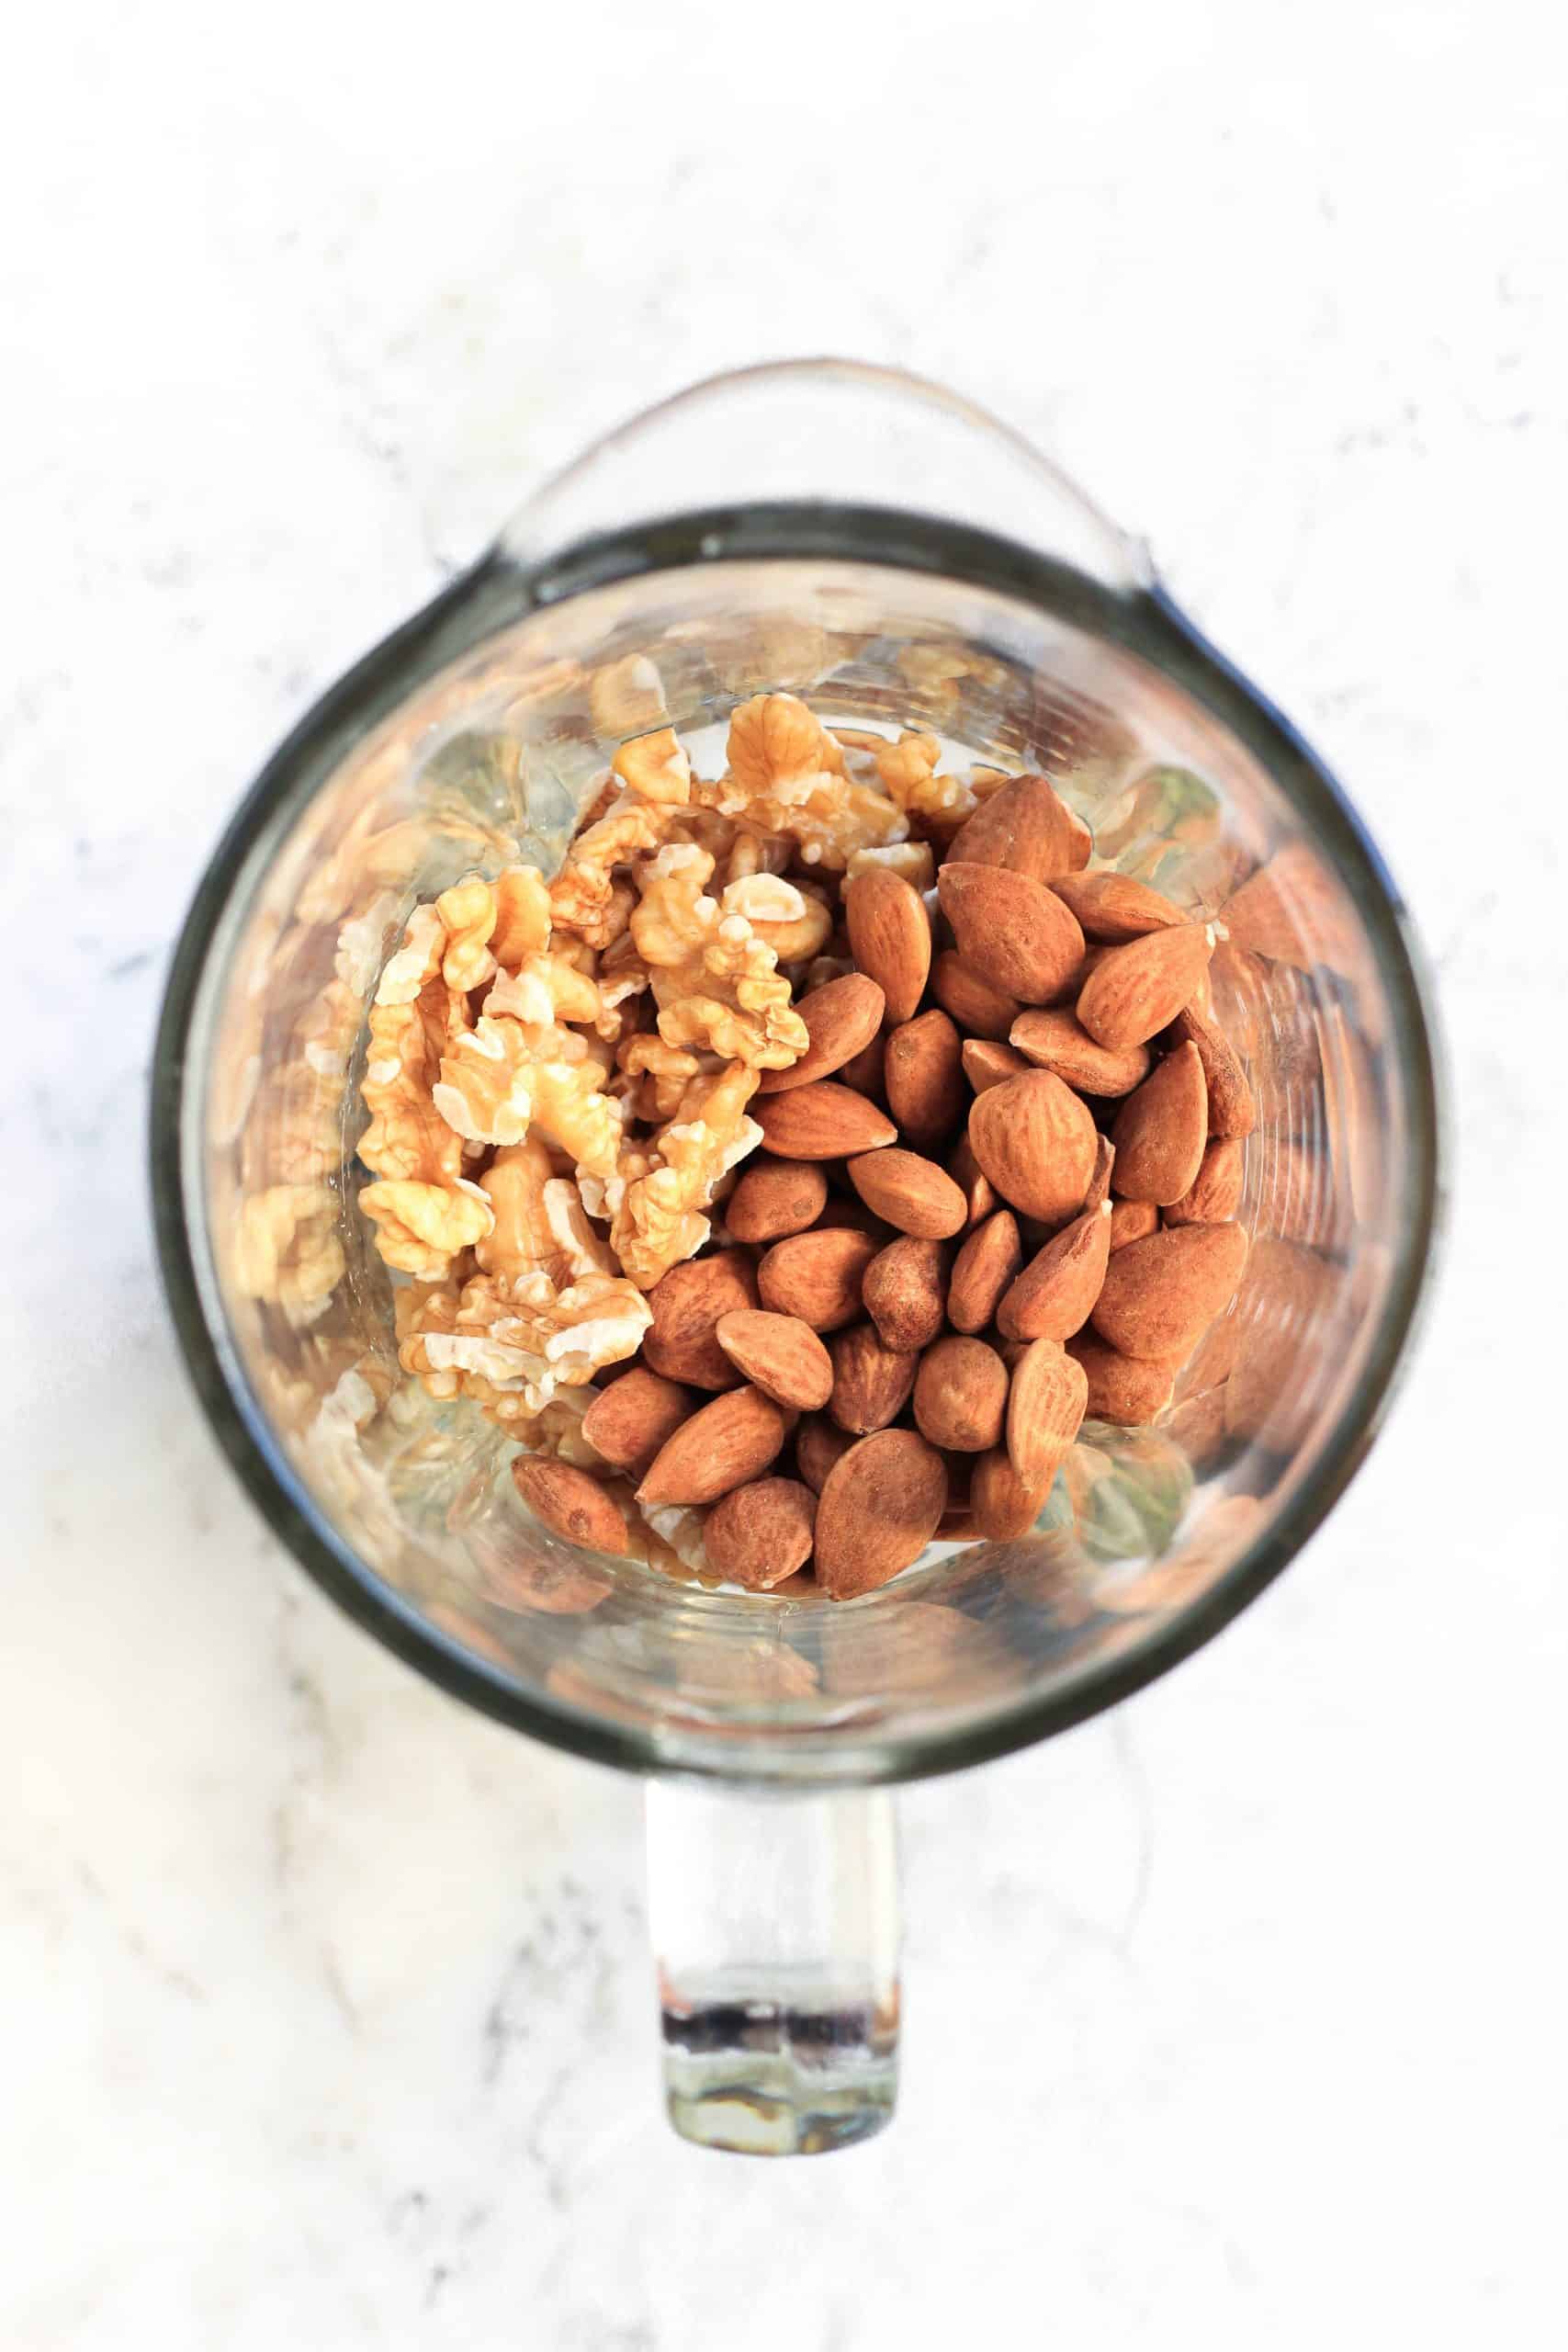 Raw almonds and walnuts in a blender.